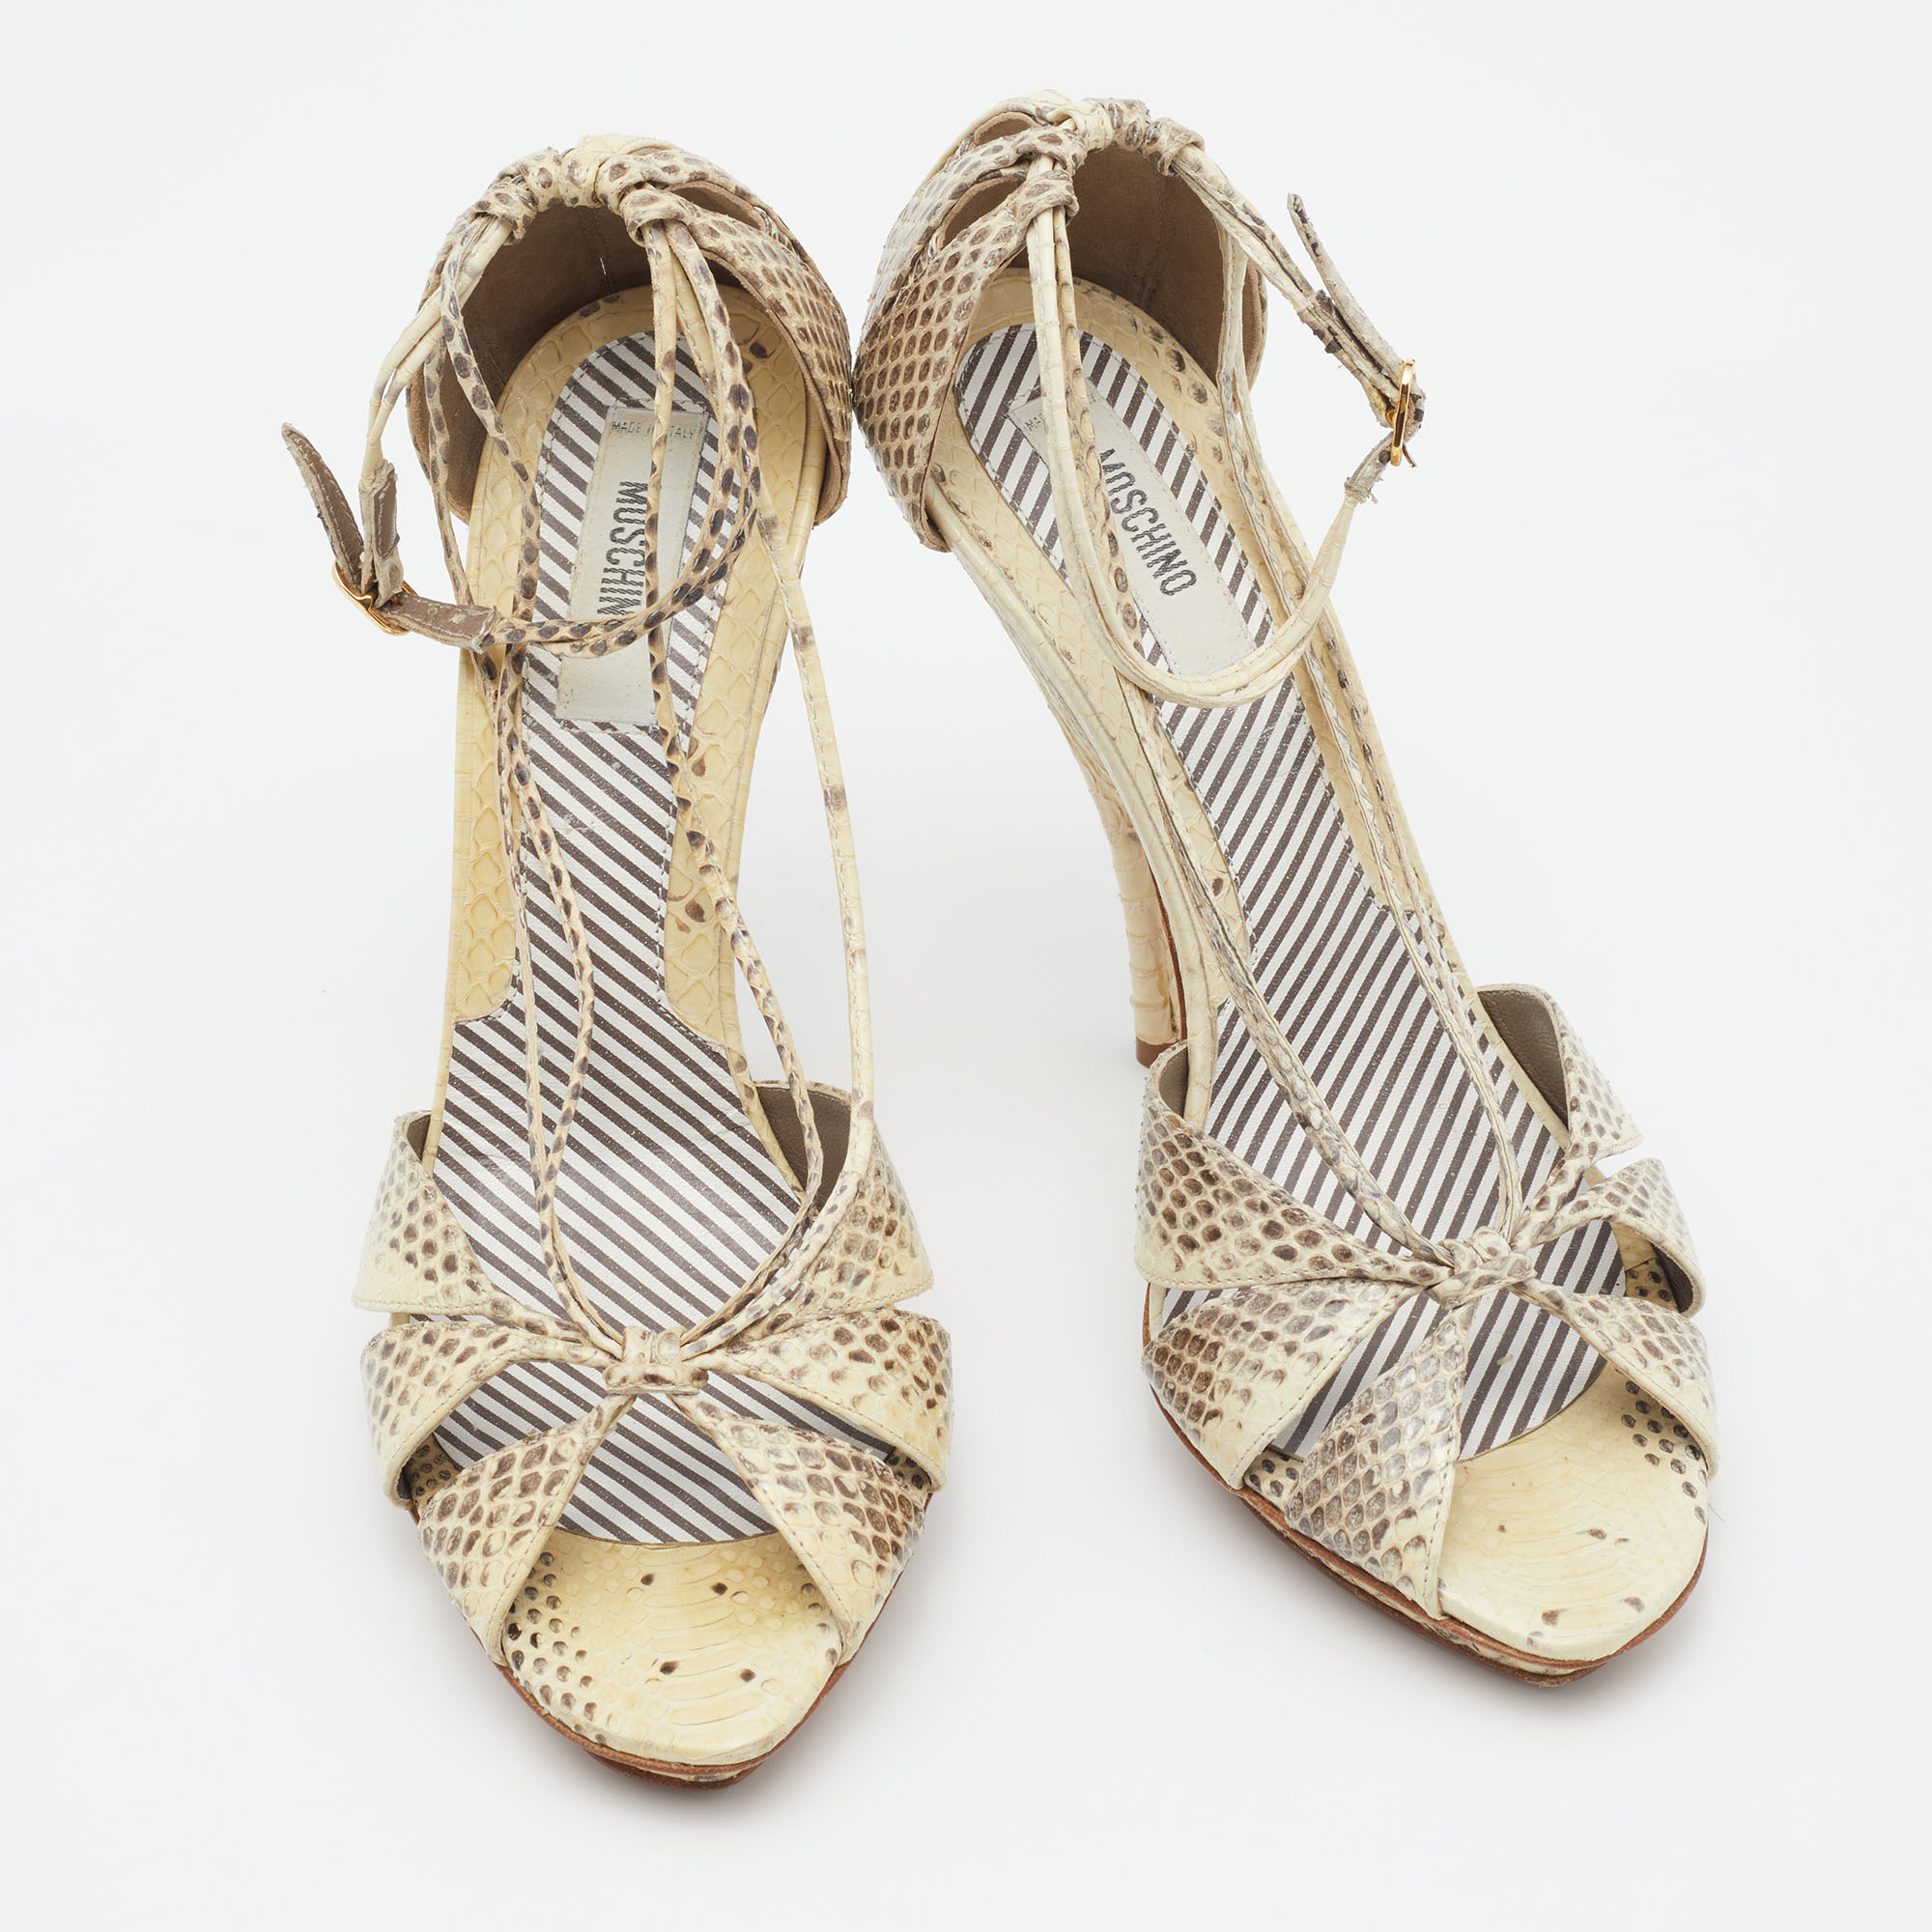 Moschino Cream/Brown Water Snake Ankle Strap Sandals Size 38.5